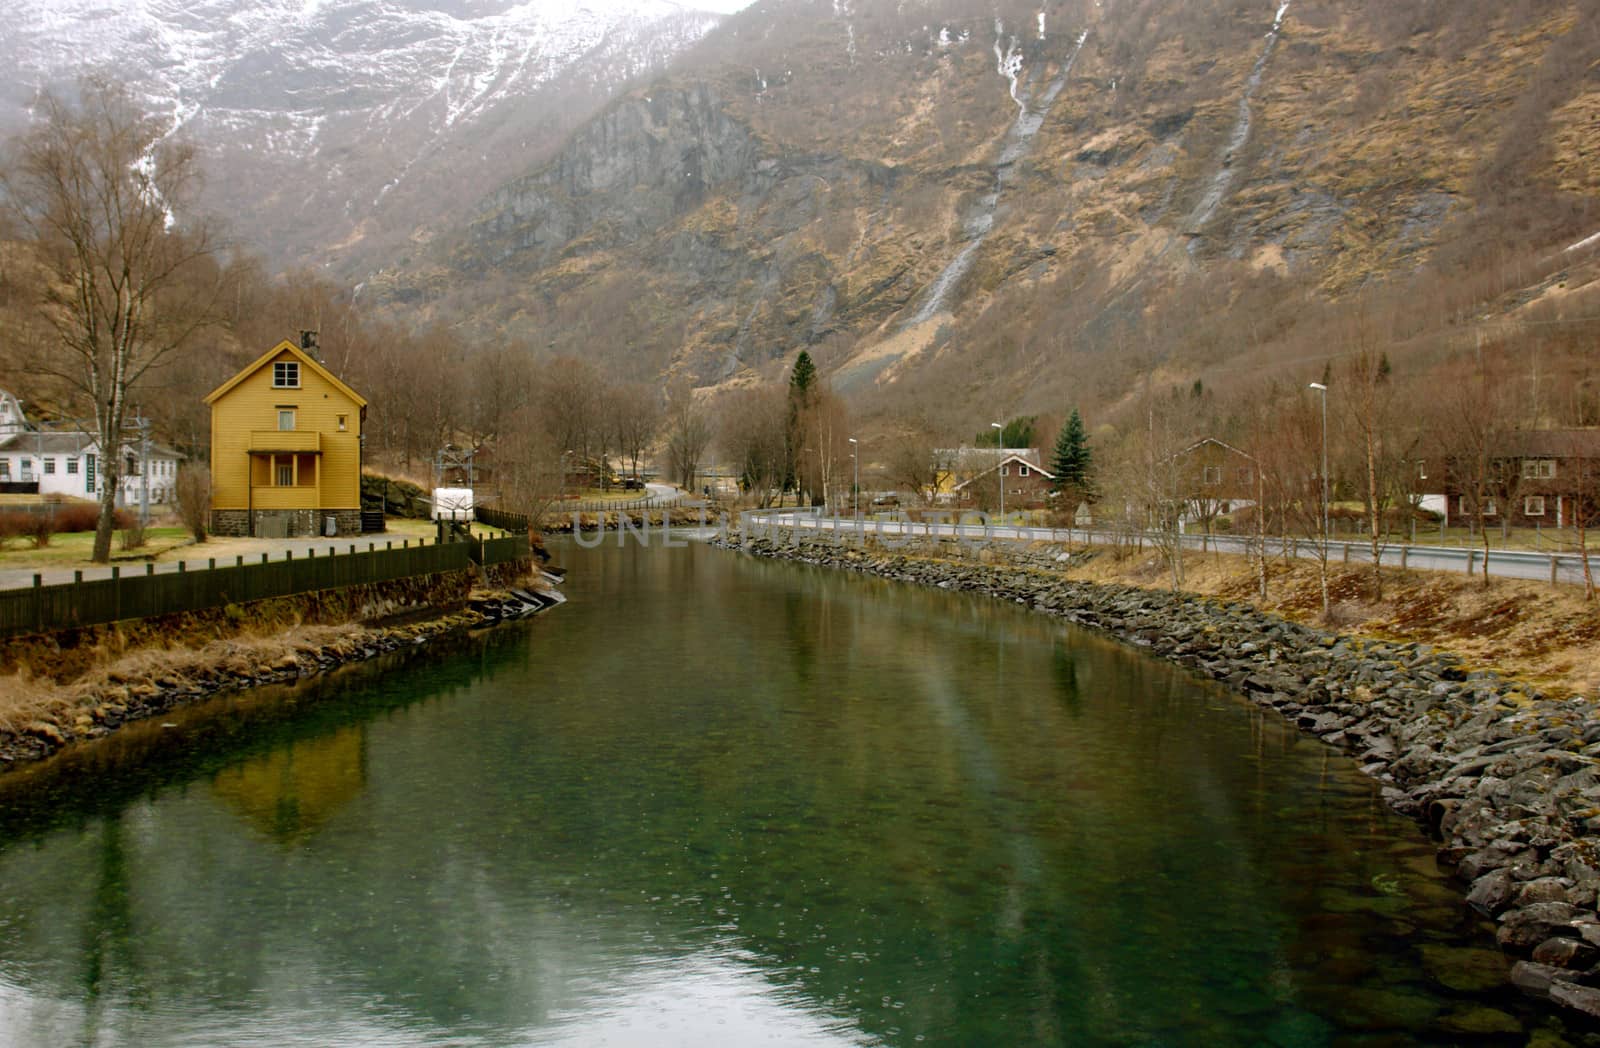 River passing trough Flam, a picturesque village in Norway mountains